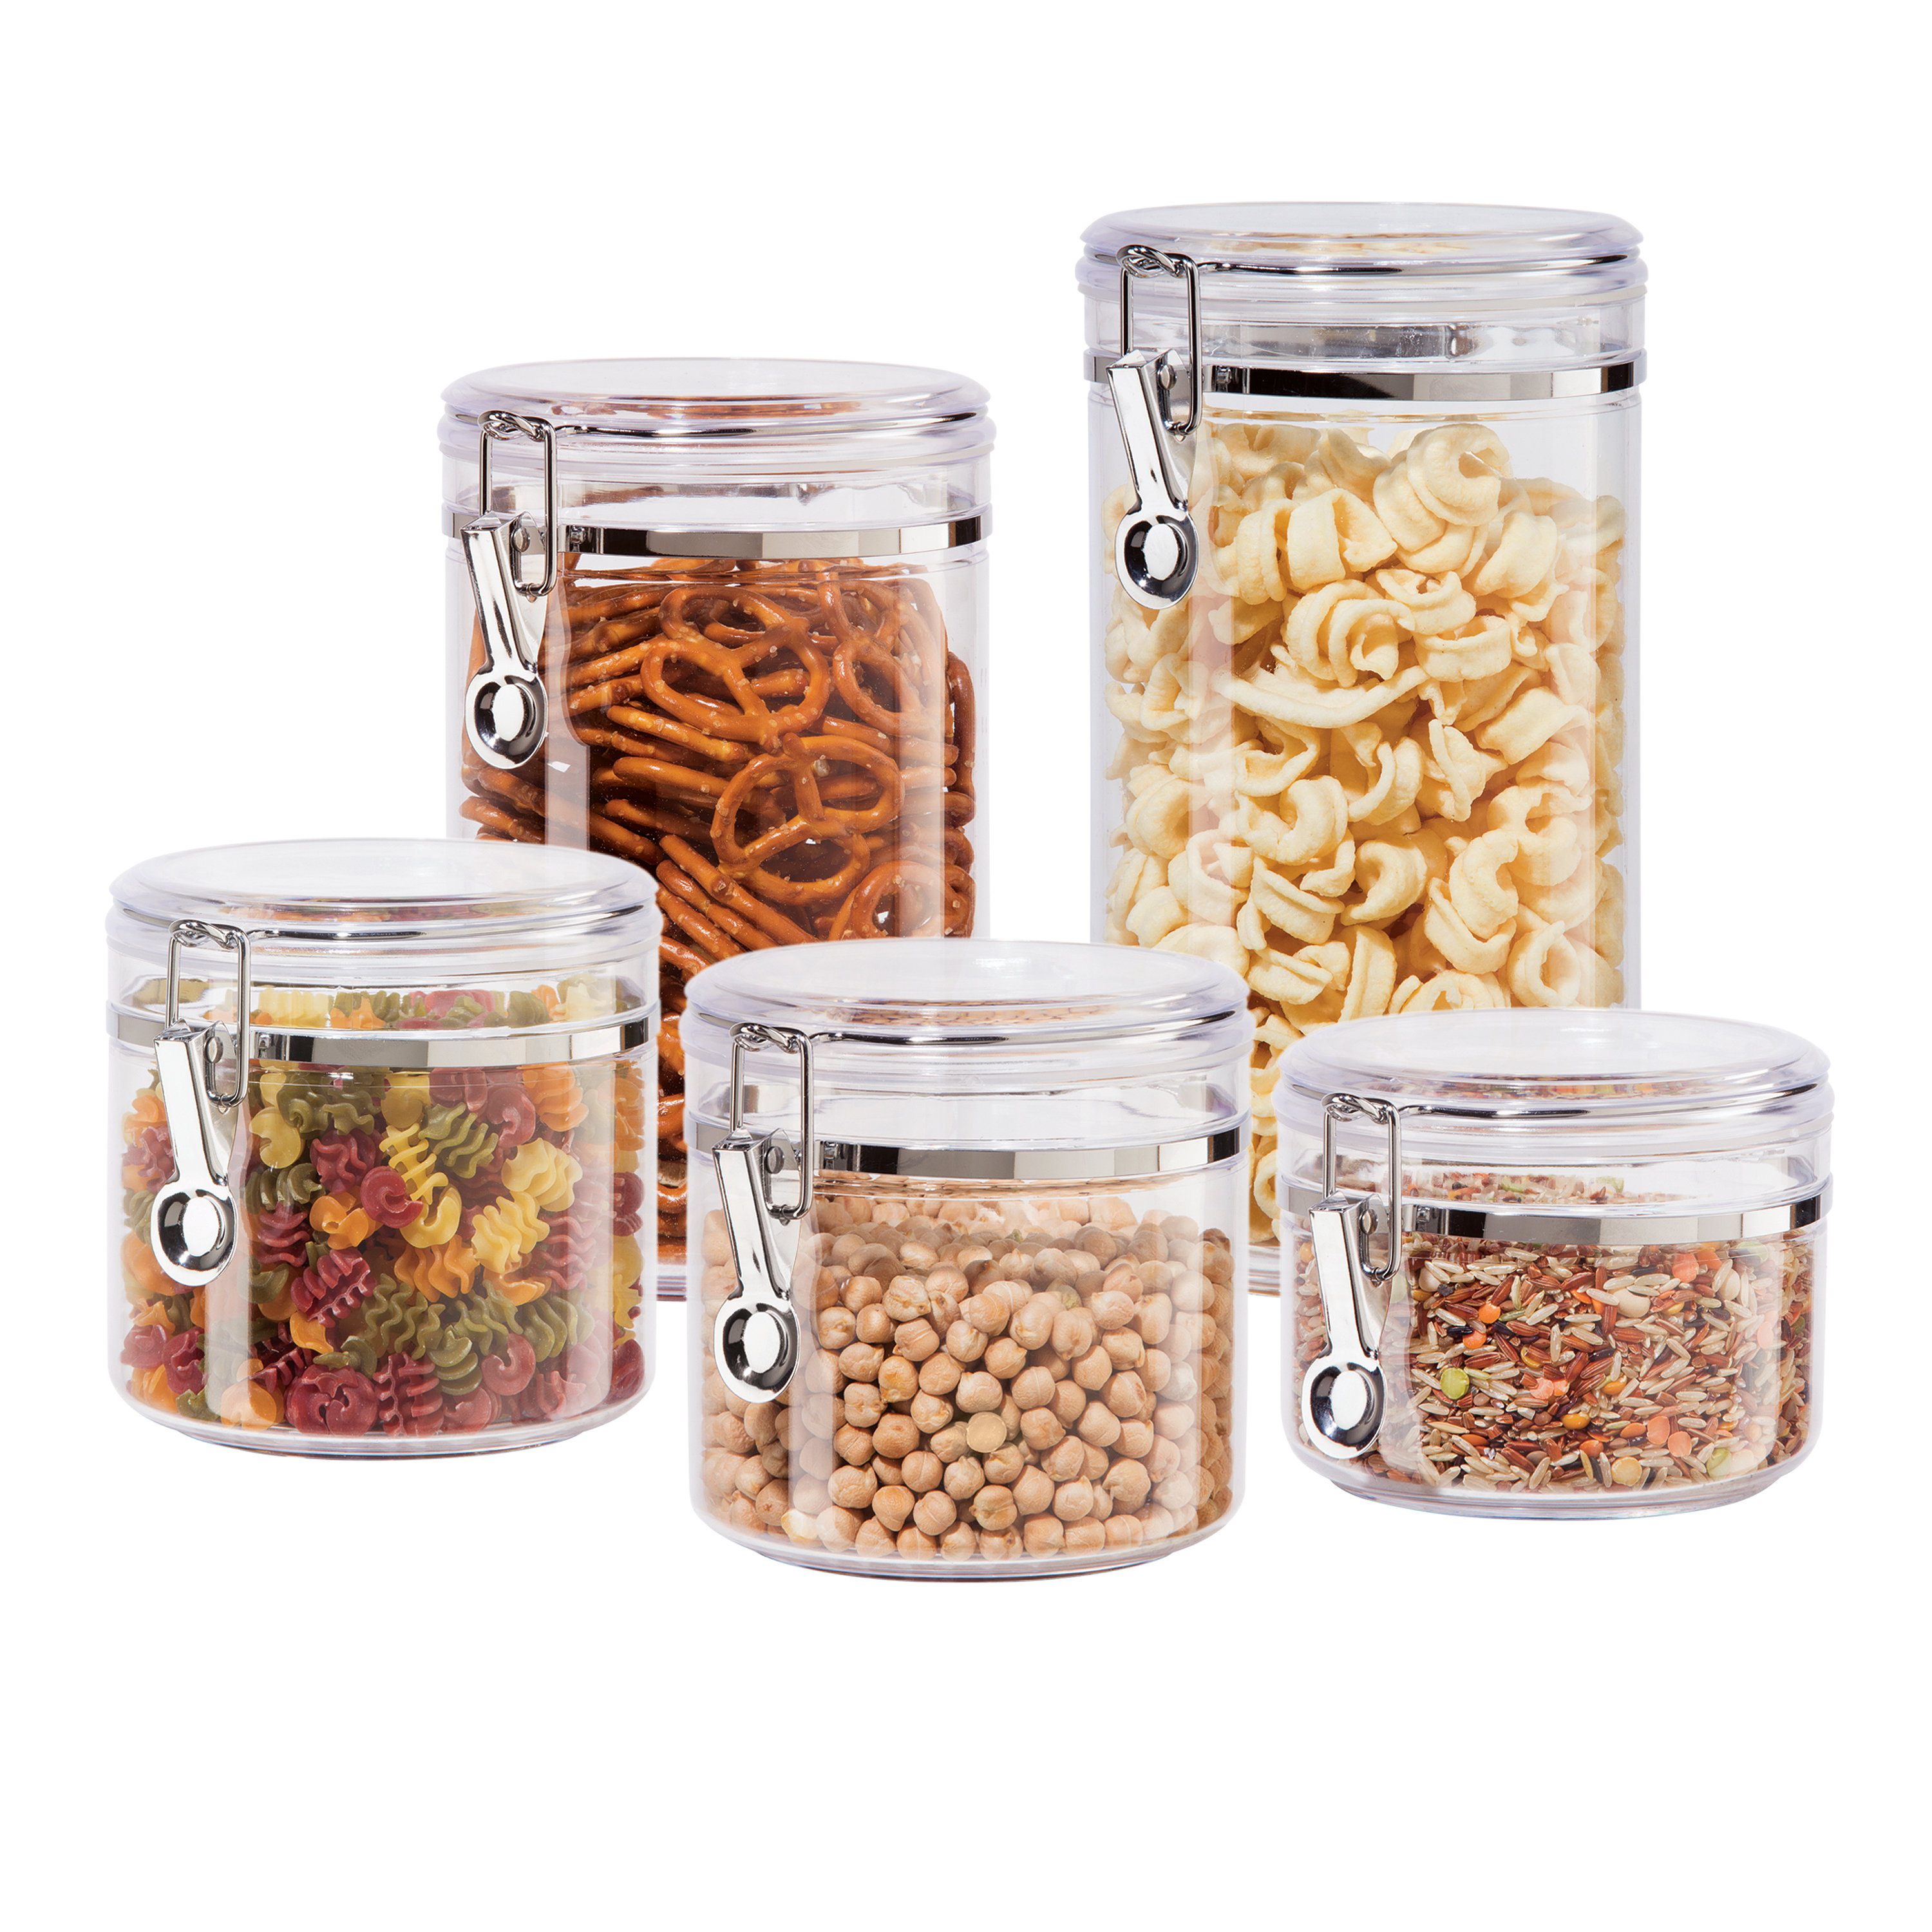 6 Piece Set of Bamboo Storage Containers with Lids for Pasta, Cookies,  Nuts, 15 oz and 24 oz Glass Jars for Kitchen Pantry (2 Sizes)